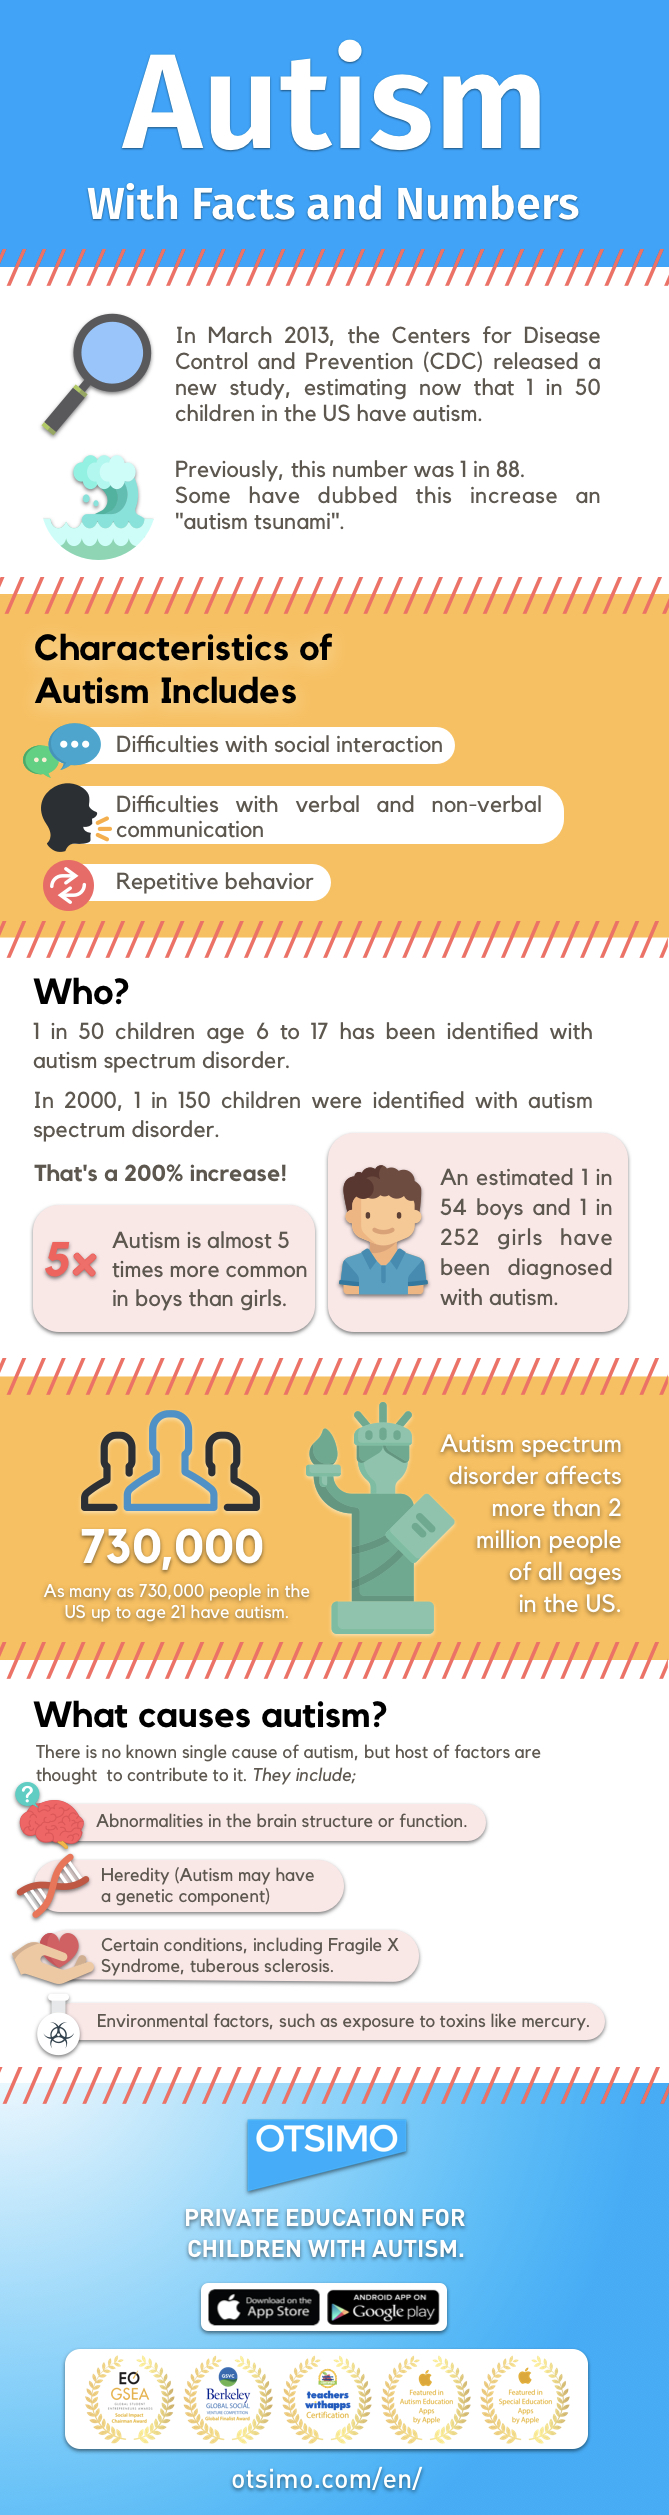 autism facts and numbers